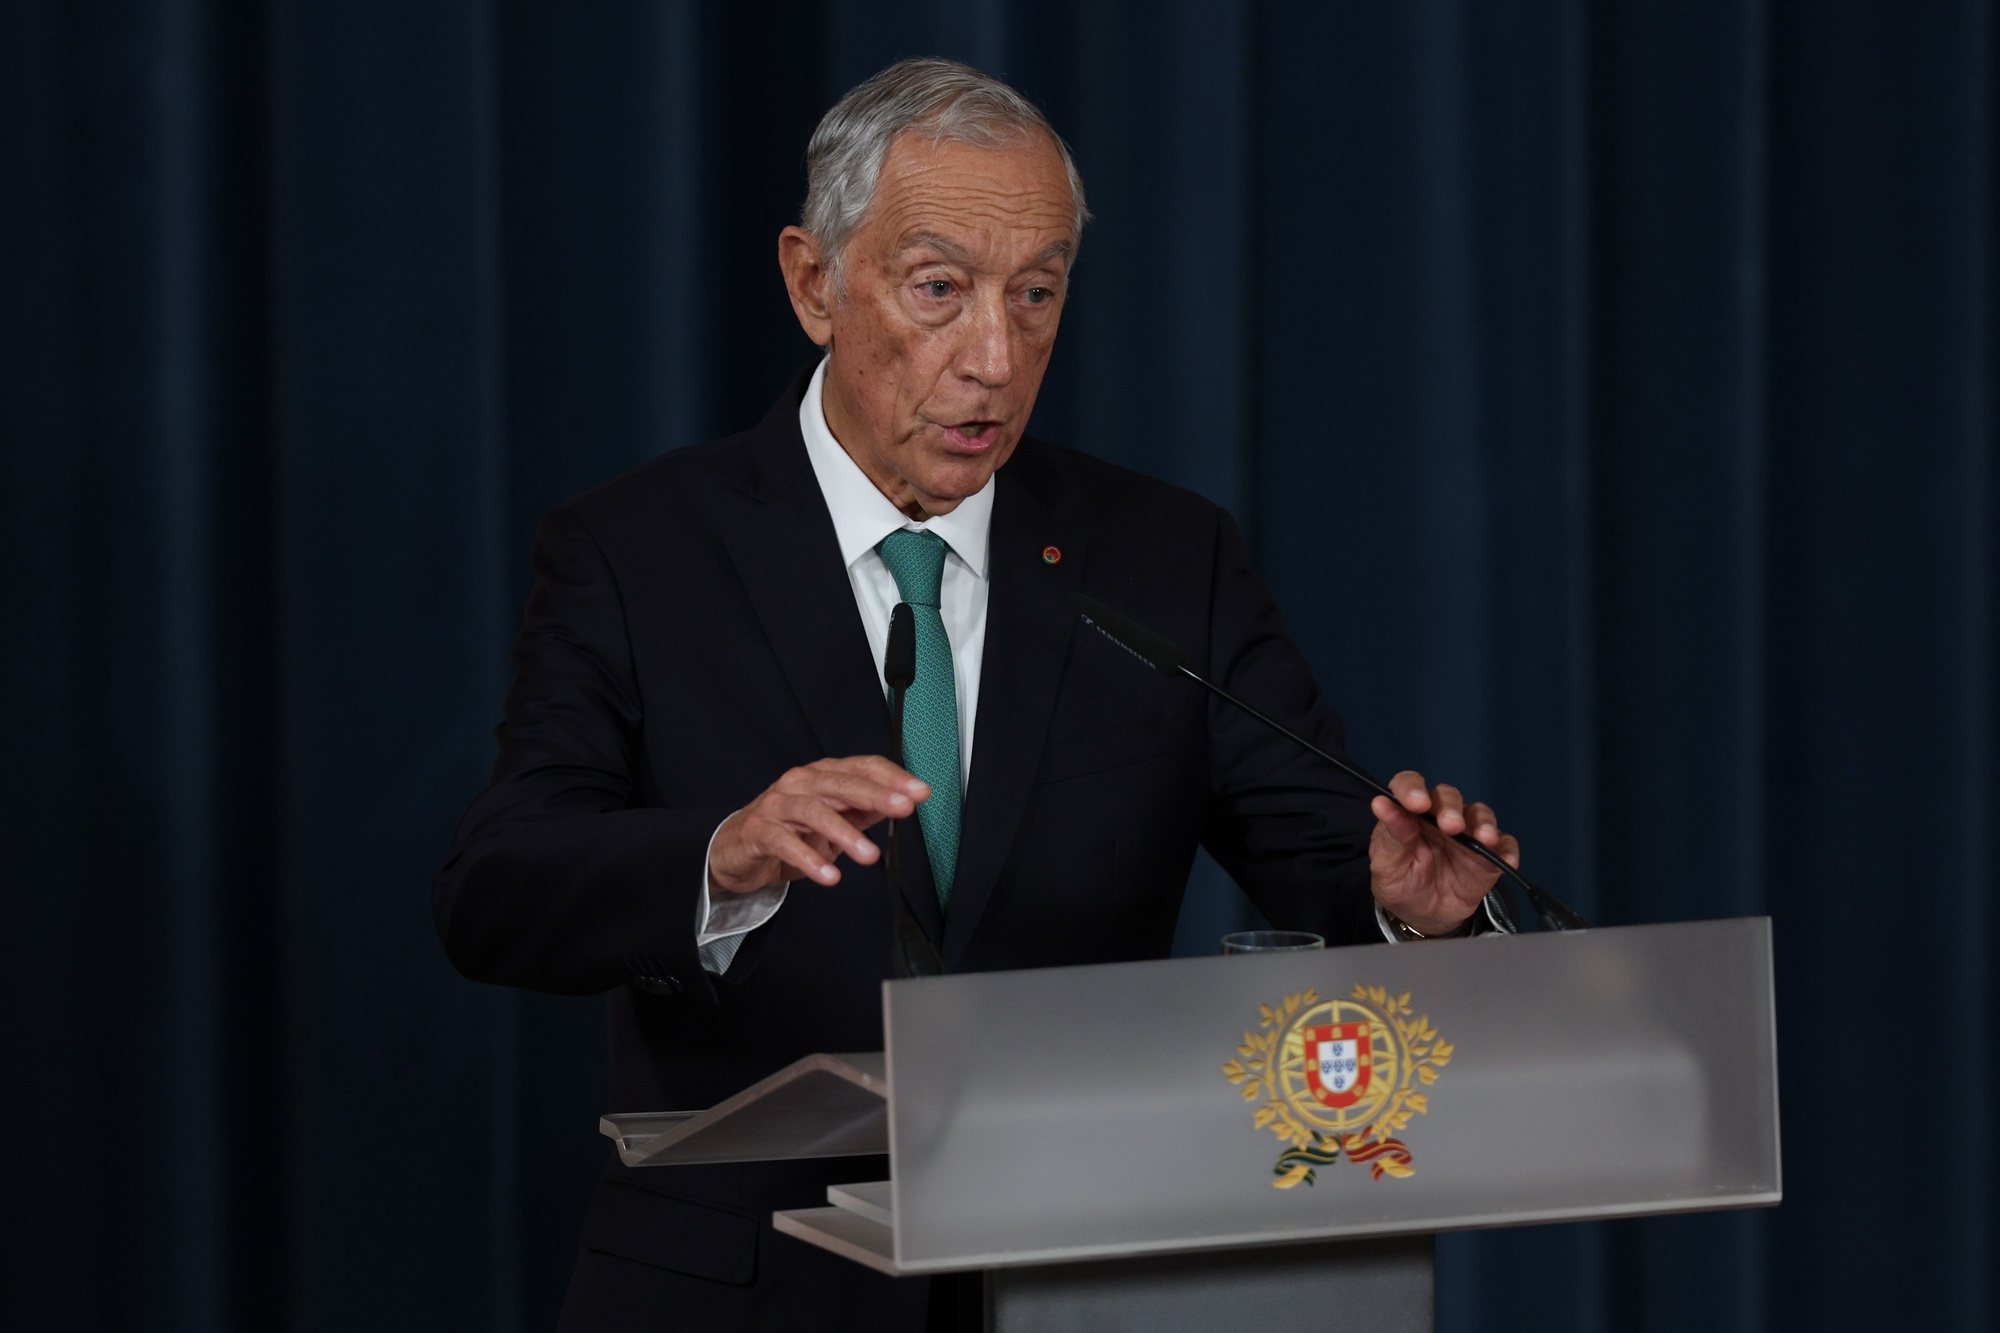 Portuguese President Marcelo Rebelo de Sousa, speak during the swearing in cerimony of the XXIV Constitutional Government held at Ajuda Palace, in Lisbon, Portugal, 02 April March 2024. These legislative elections resulted in the victory of AD - a pre-election coalition formed by PSD, CDS-PP and People&#039;s Monarchist Party (PPM) - by around 54,000 votes (0.85%) more than the PS, the narrowest margin in the history of Portuguese democracy. The two coalitions led by the PSD (the AD on the mainland and in the Azores, and Madeira Primeiro with the PSD and CDS-PP in Madeira) - won 28.83% of the votes and 80 members of parliament (78 for the PSD and two from the CDS-PP), according to the official results. The PS was the second-most-voted party with 27.98% and 78 MPs. MIGUEL A. LOPES/LUSA